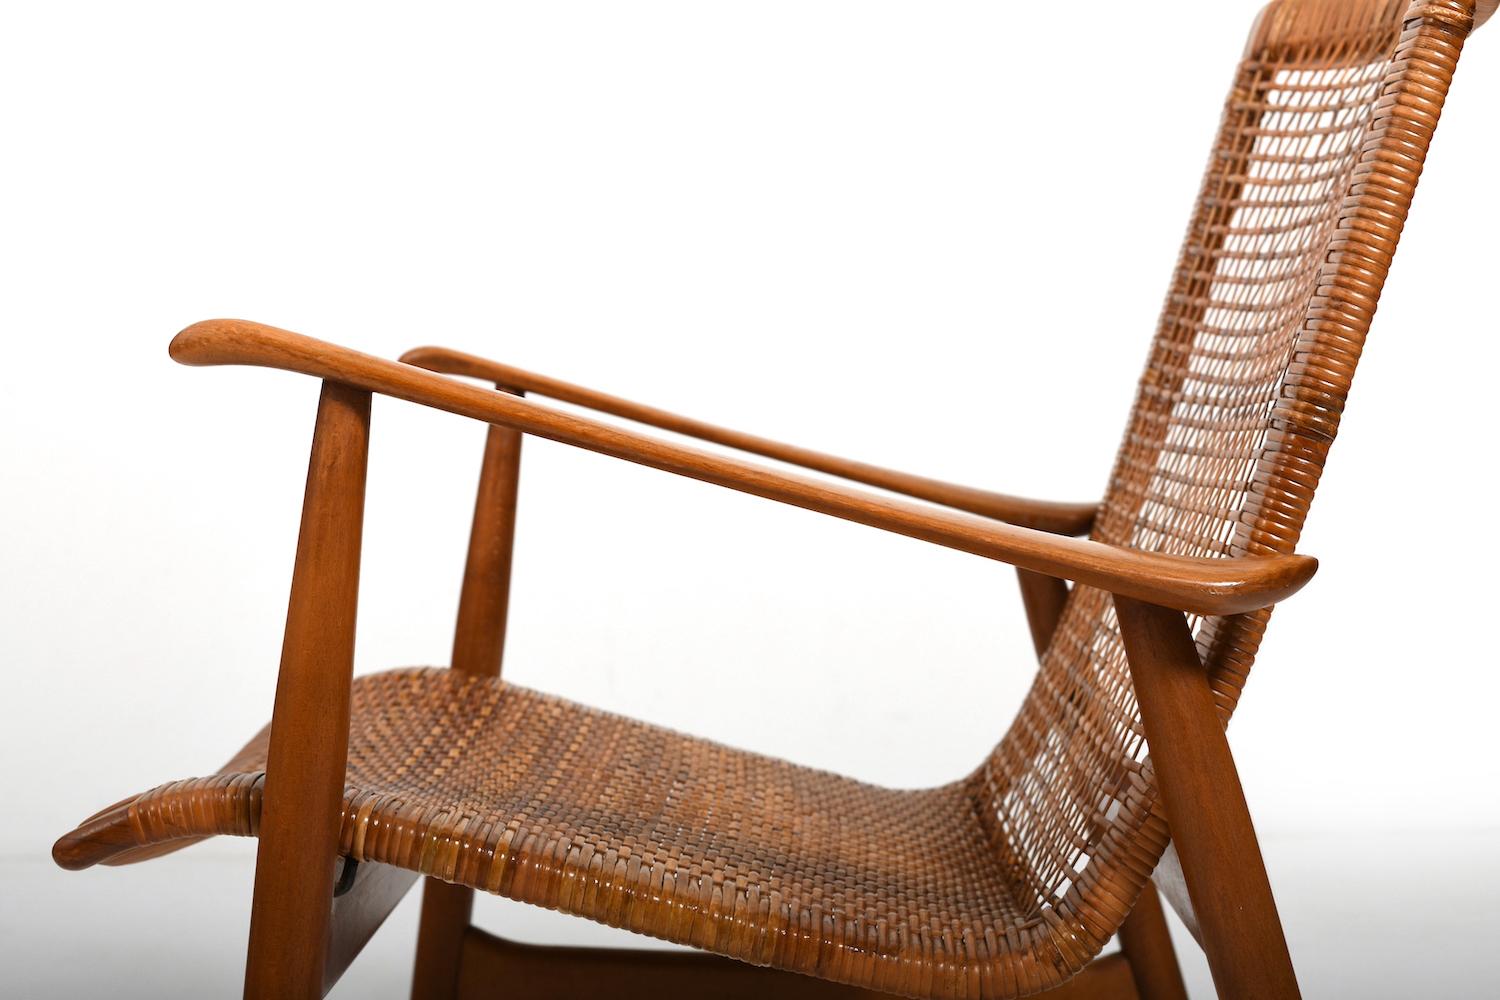 Scandinavian Modern Ib Kofod-Larsen attr. Easychair with Cane early 1950s. For Sale